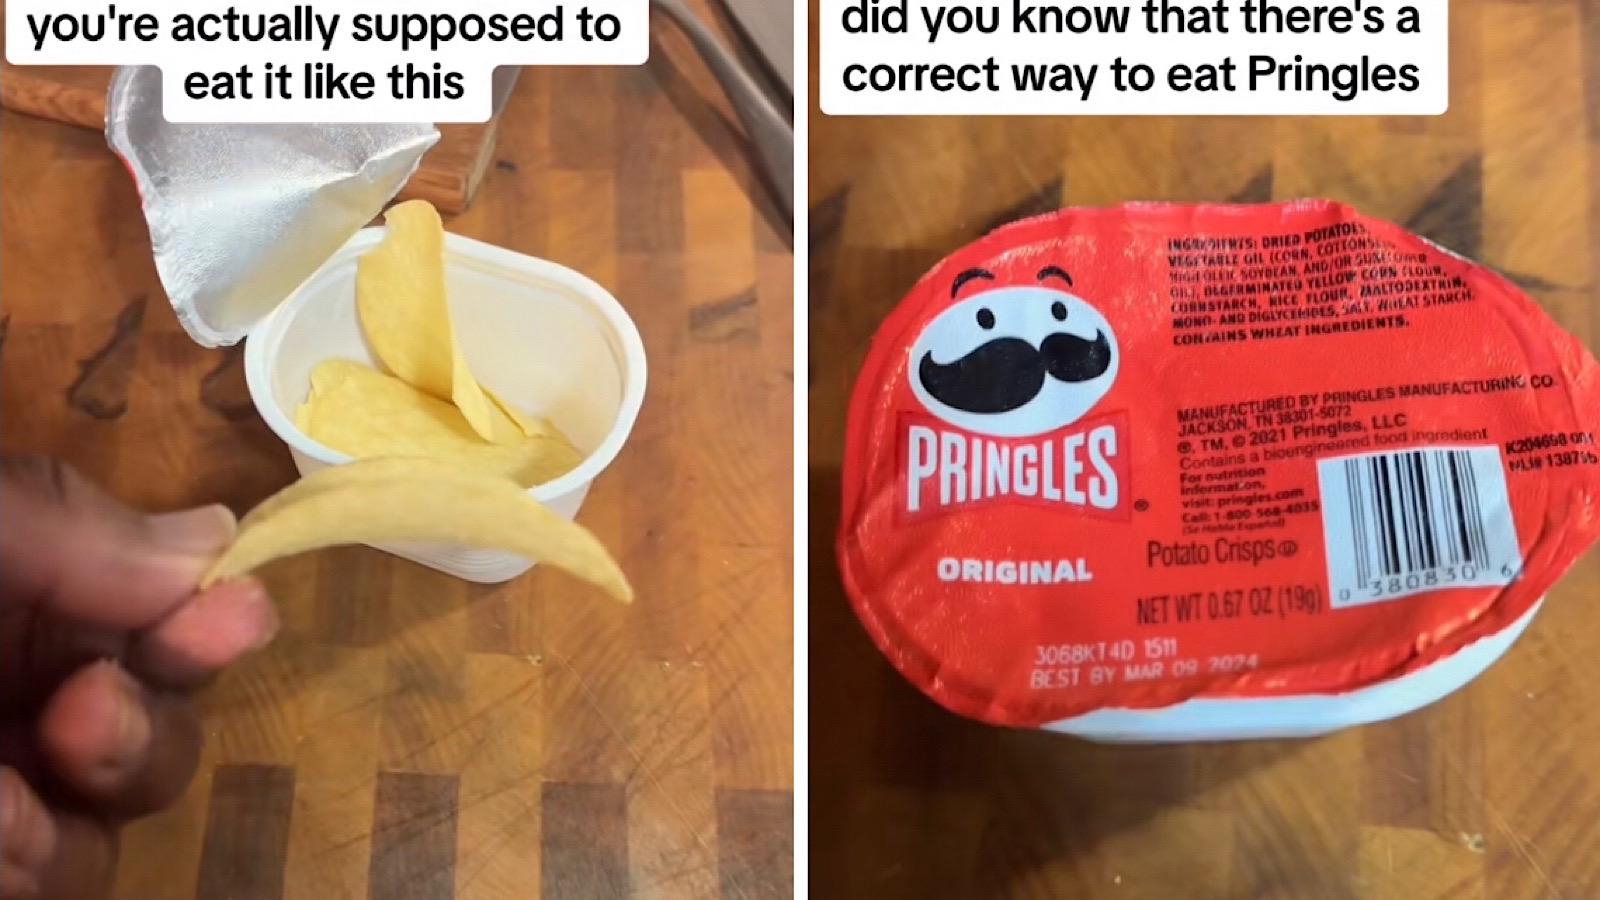 is there a correct way to eat pringles?